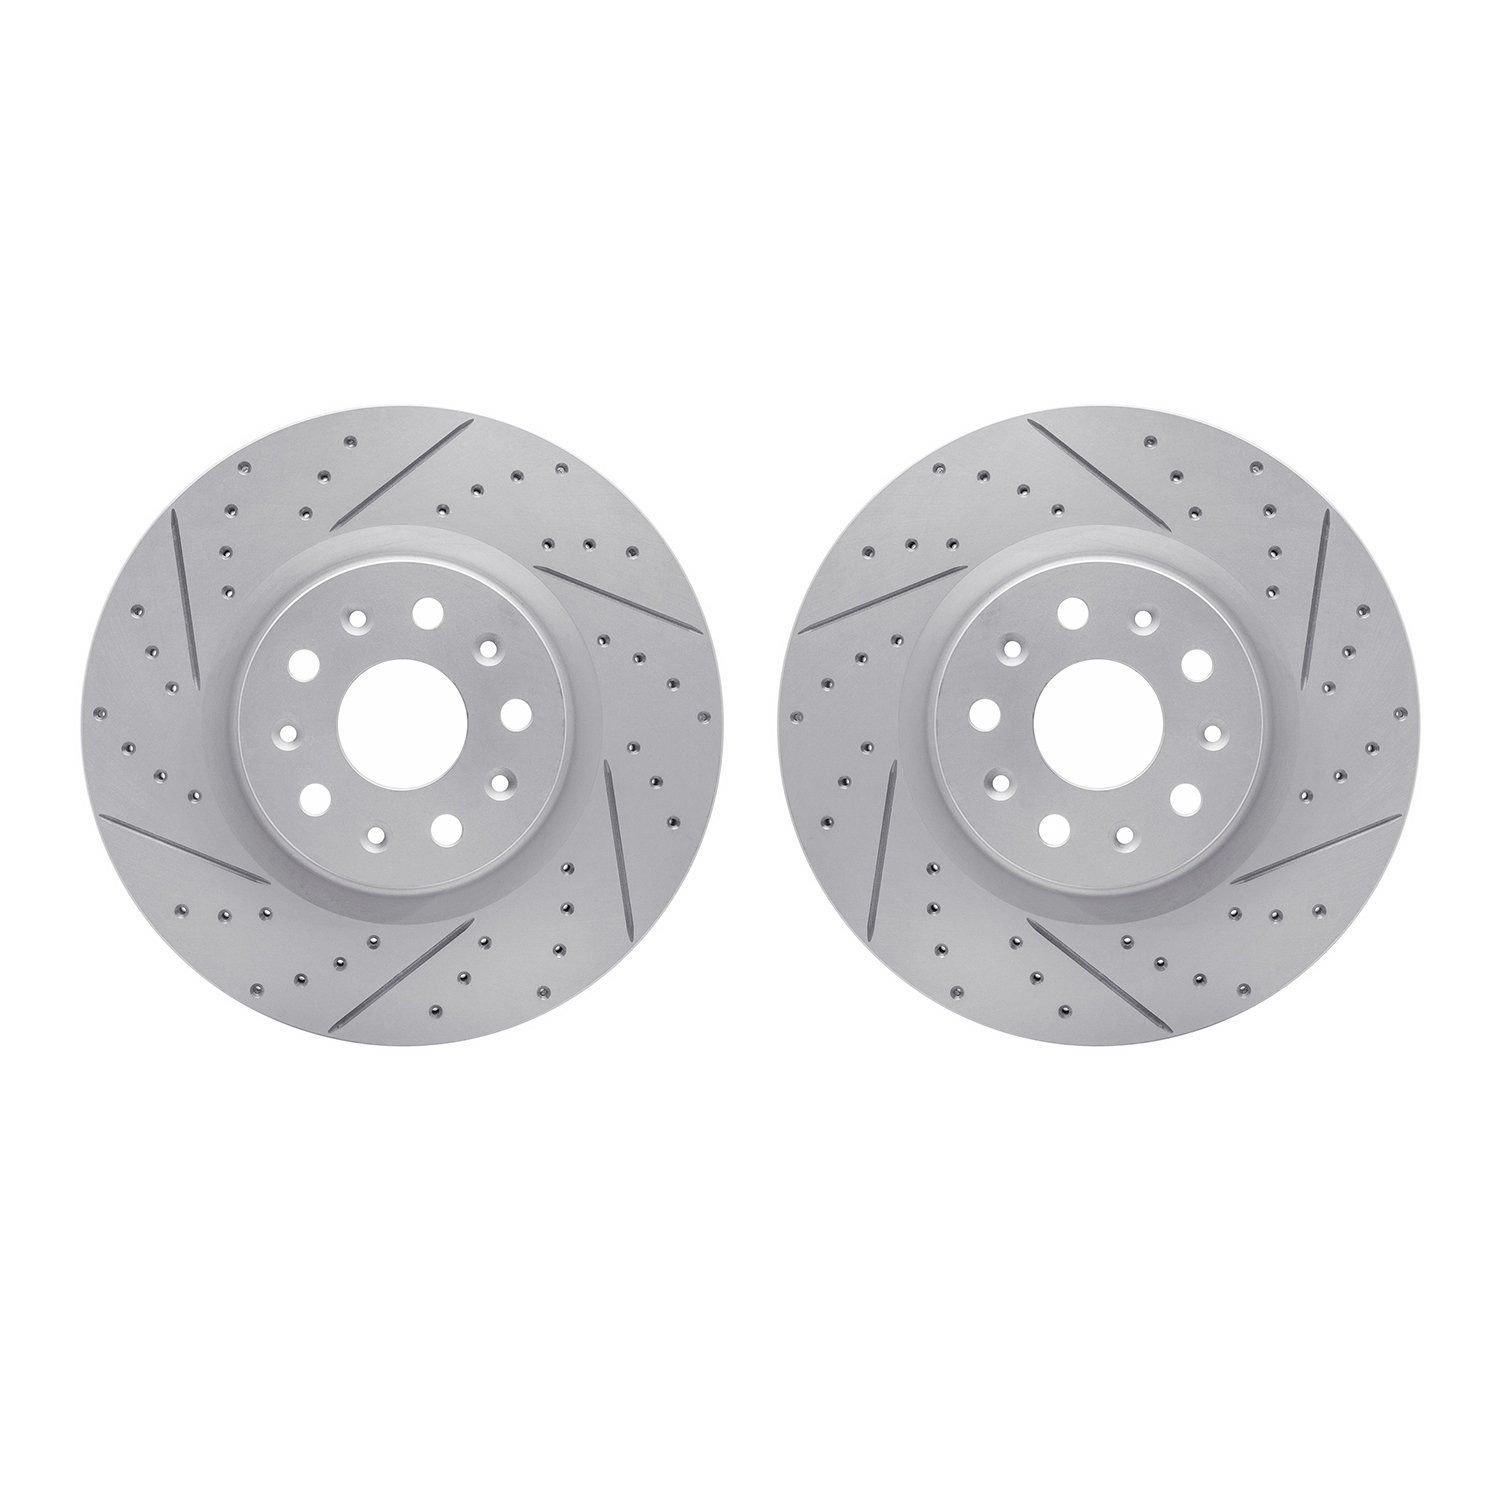 2002-46008 Geoperformance Drilled/Slotted Brake Rotors, Fits Select GM, Position: Front